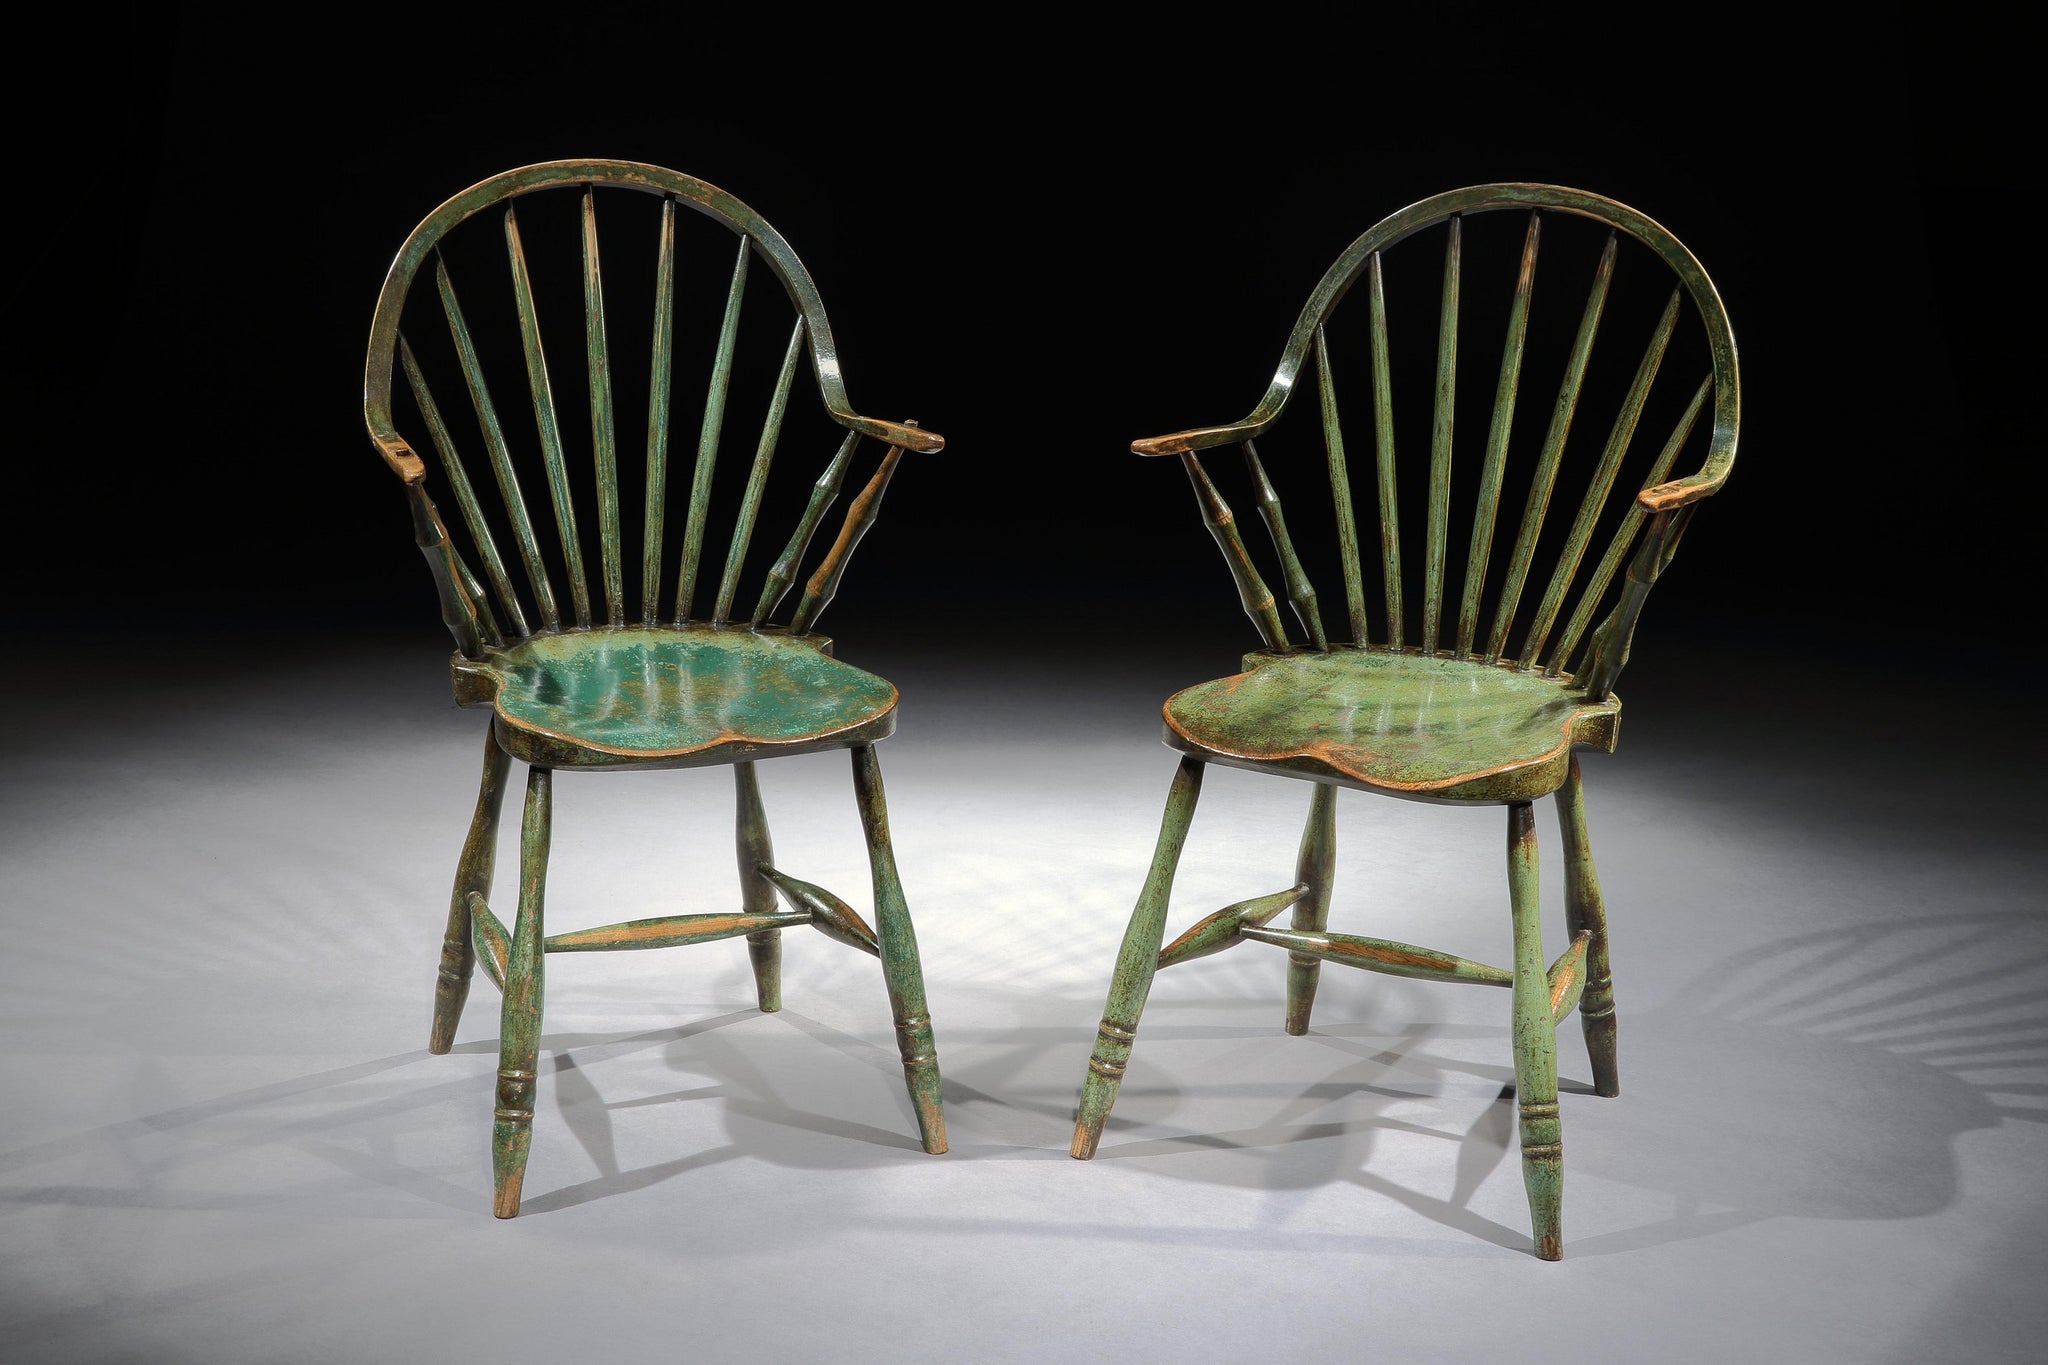 Iconic Pair of "Yealmpton" Continuous Arm Windsor Chairs